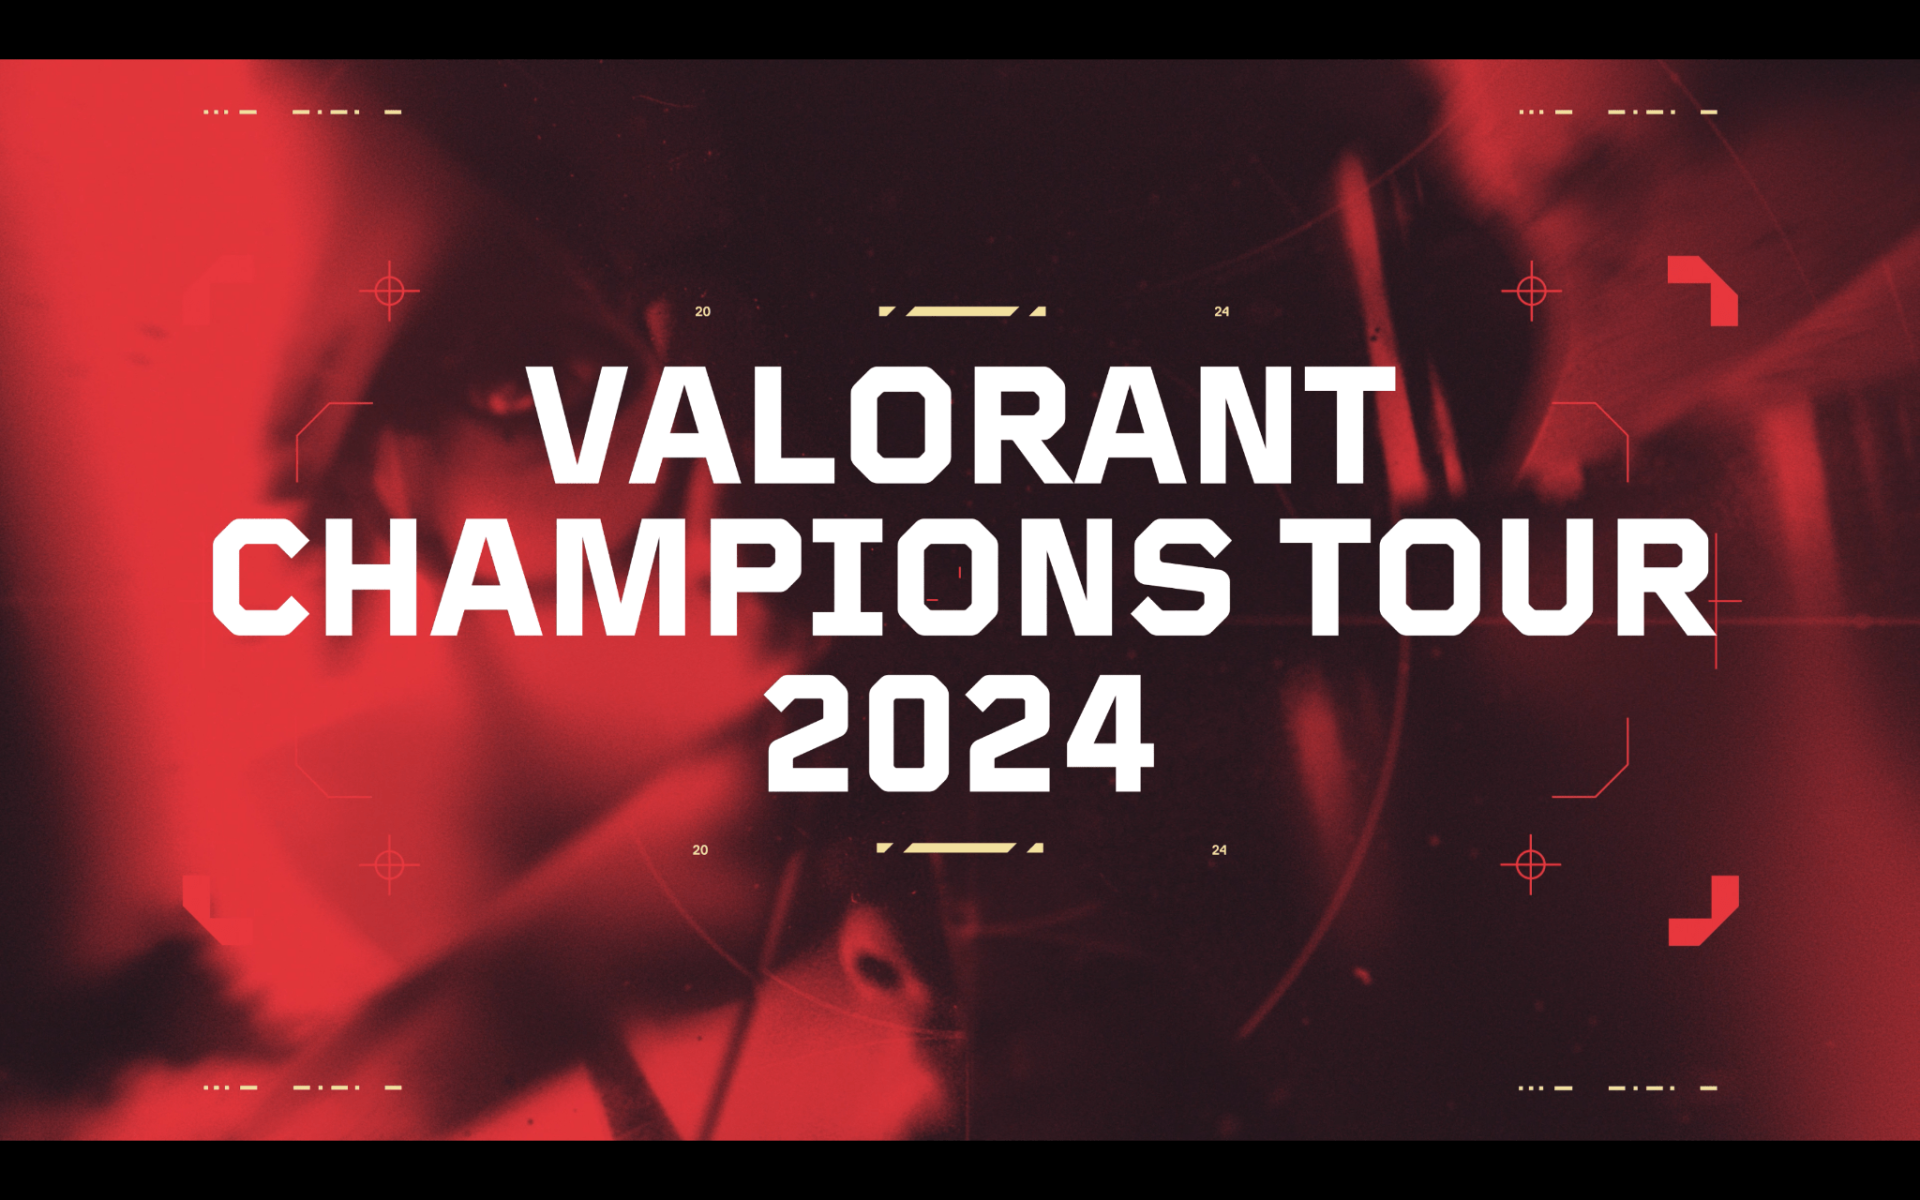 VALORANT Masters coming to Shanghai in 2024